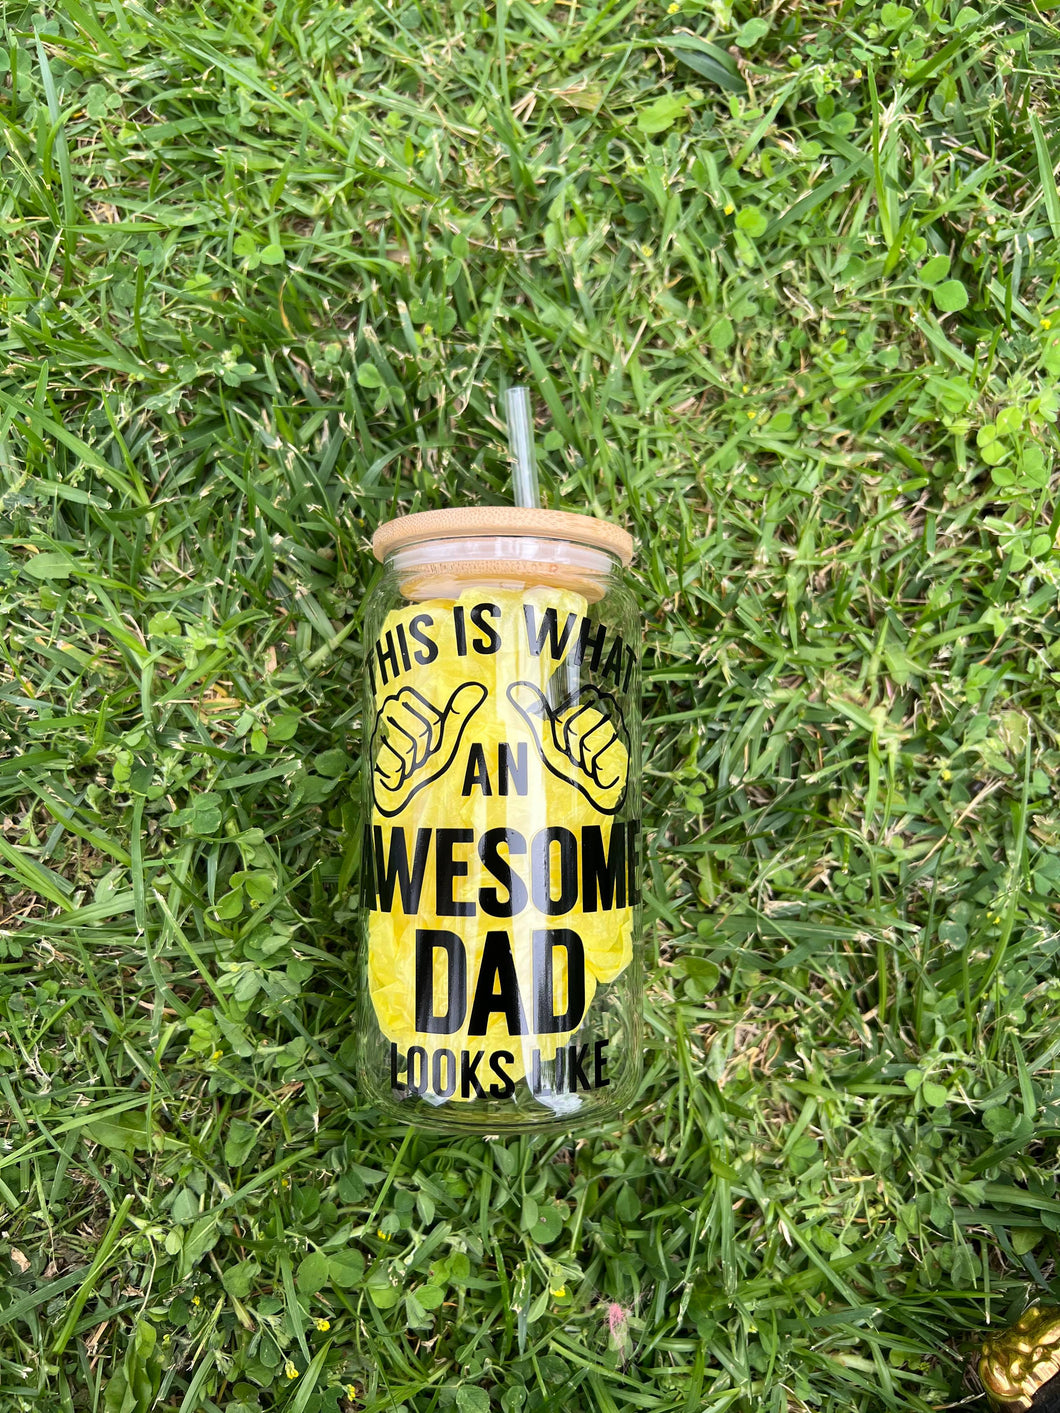 NEW! 16oz Awesome Dad Cup